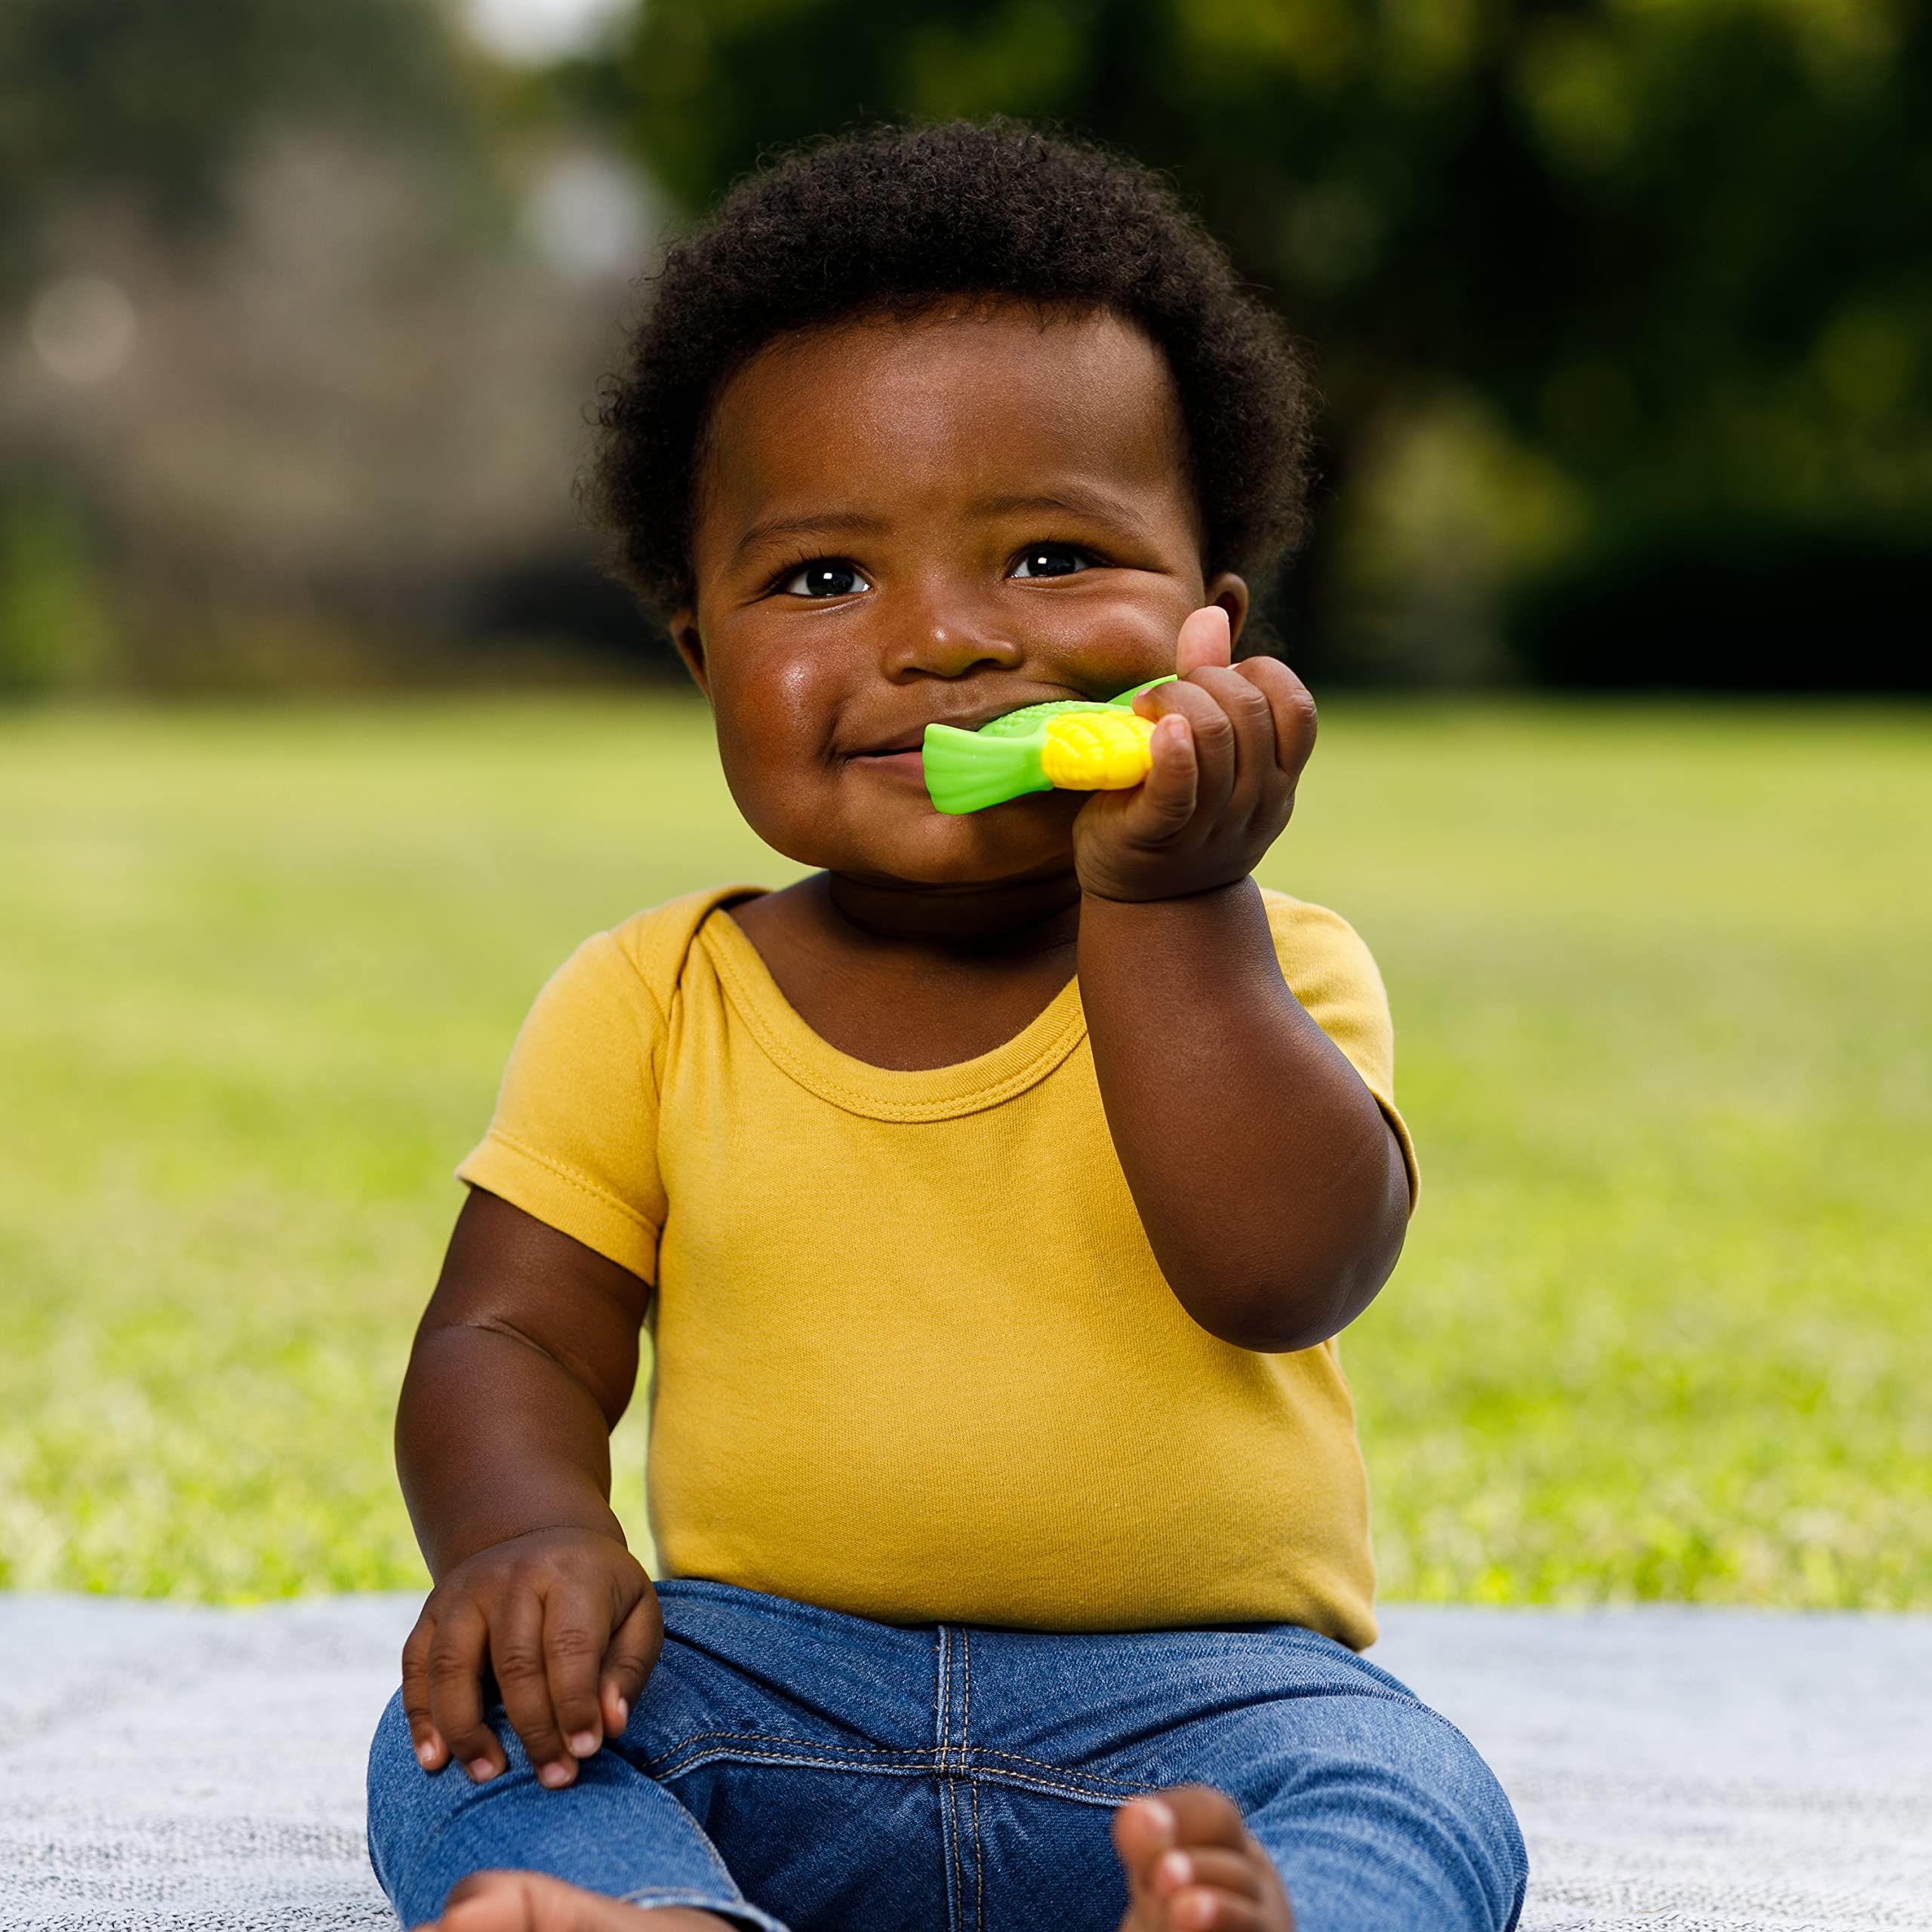 Infantino Lil' Nibbles Textured Silicone Teether - Sensory Exploration and Teething Relief with Easy to Hold Handles, Corn